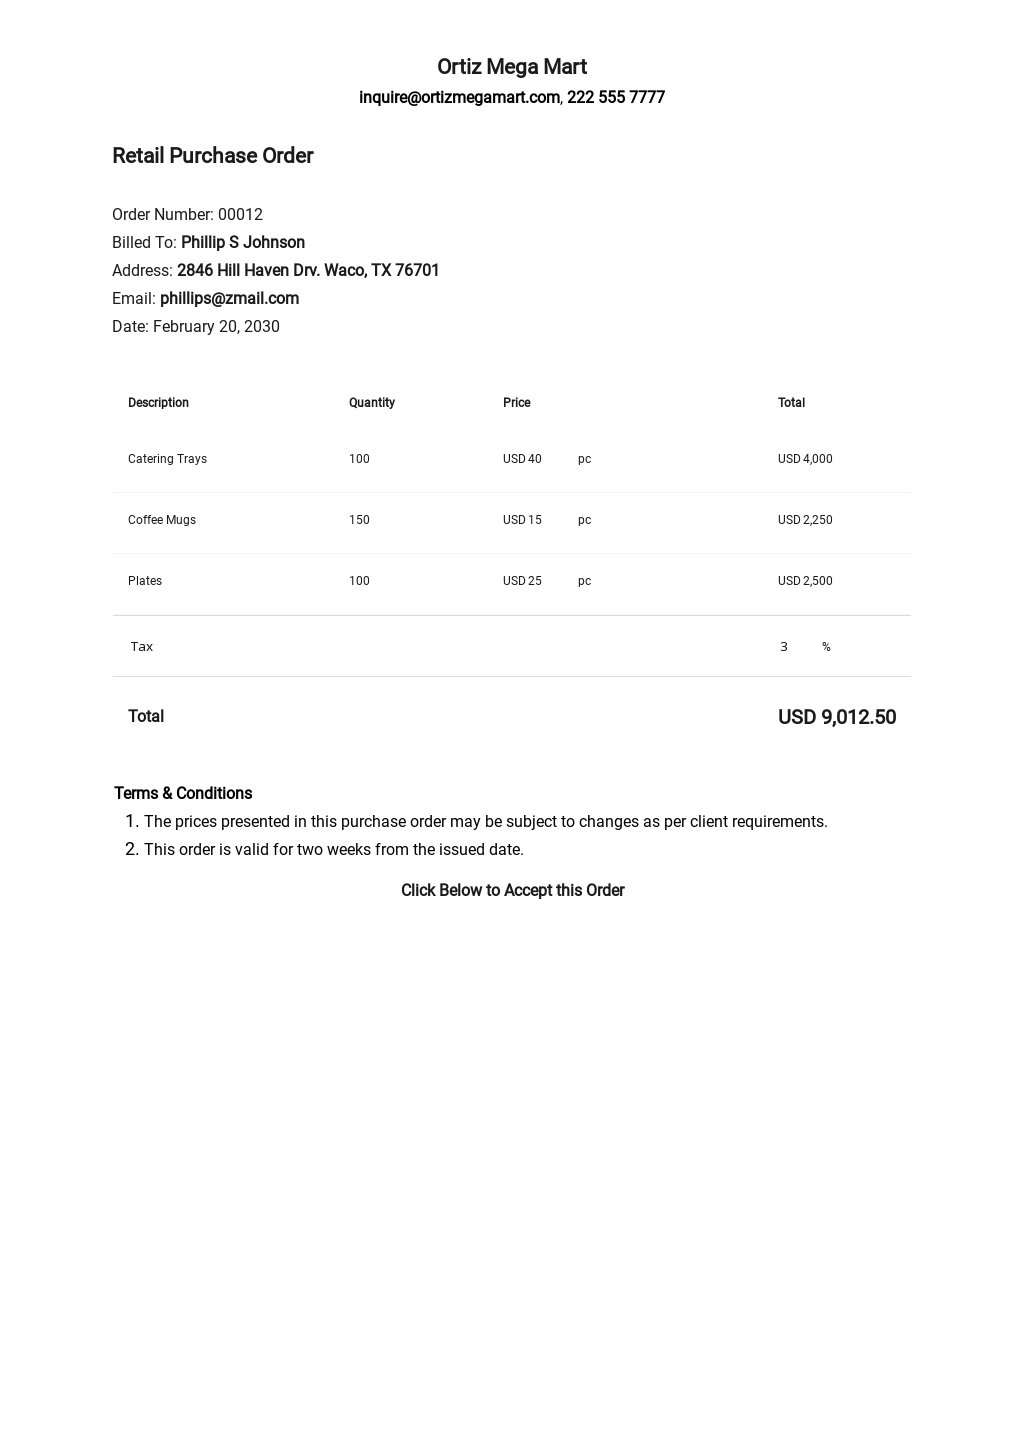 Free Retail Purchase Order Template.jpe